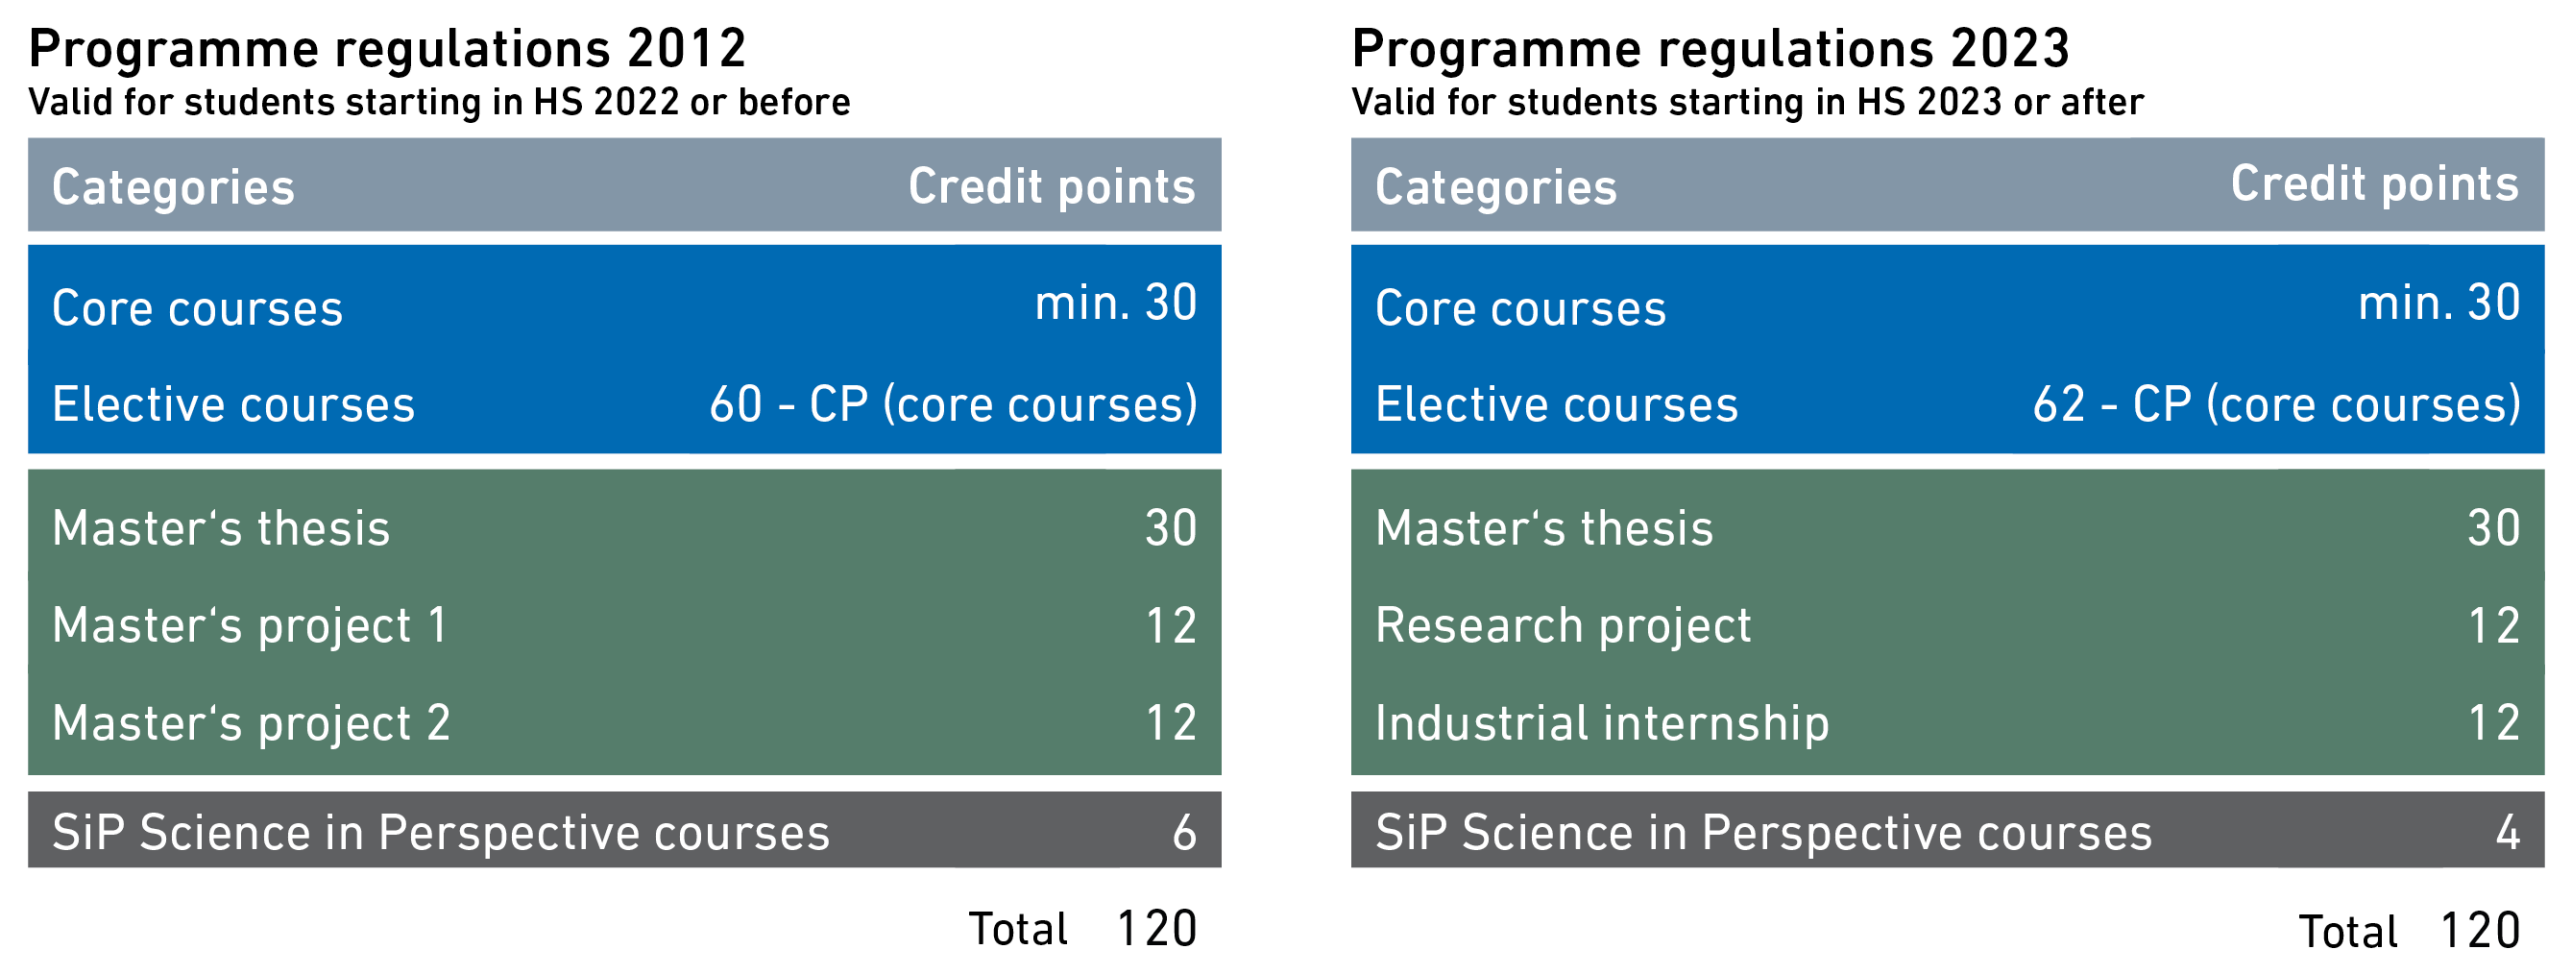 Enlarged view: Structure of the Master's degree programme in Materials (Regulations 2012 vs. Regulations 2023)